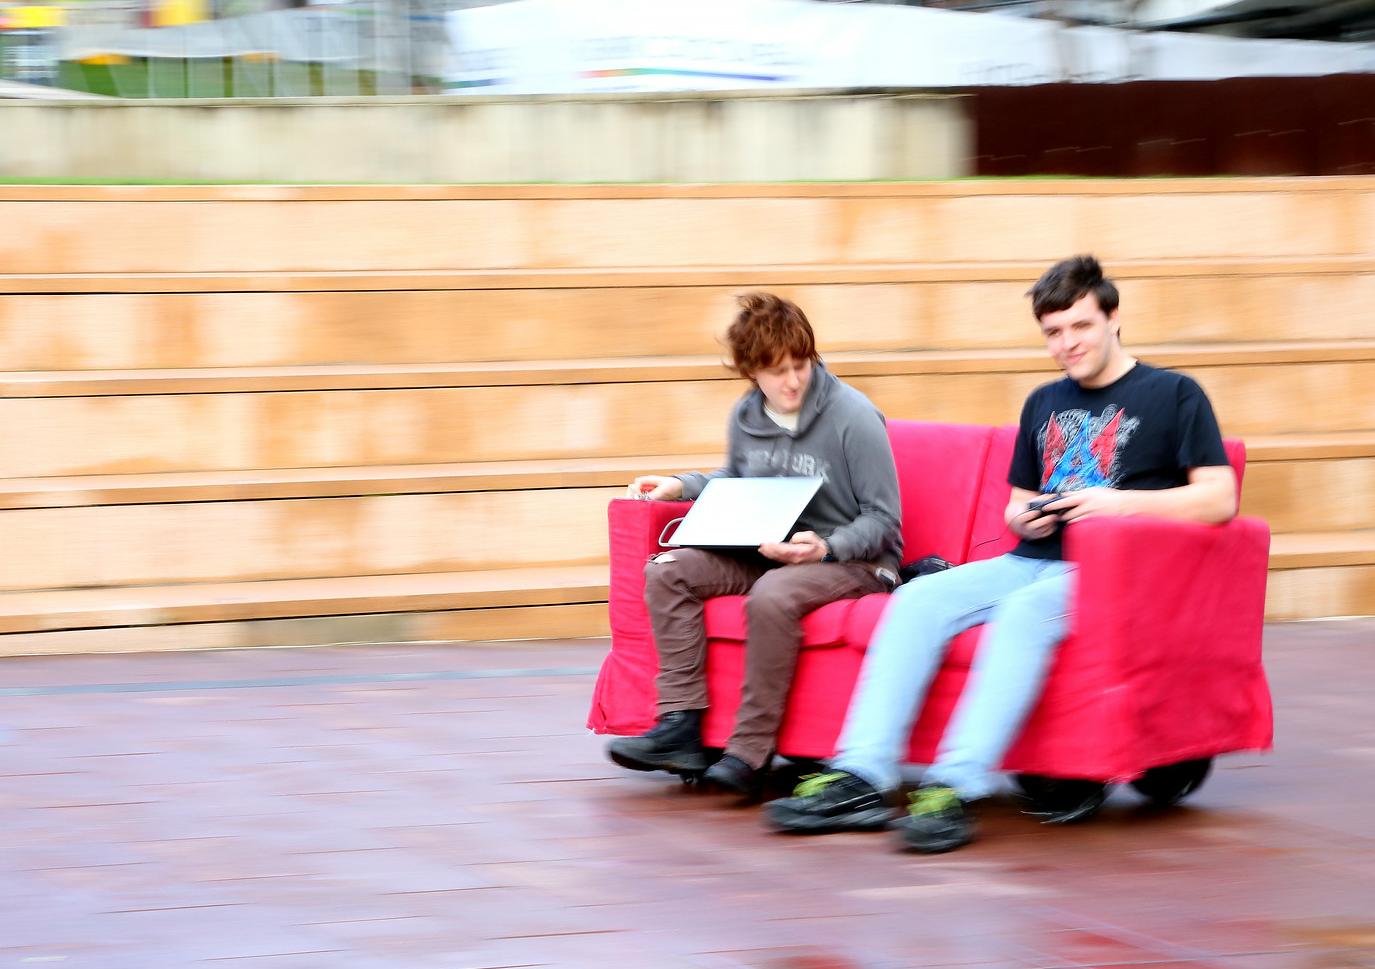 Engineering students Laura Hodges and Fred Westling drive the RoboCouch. Photo: Leilah Schubert)